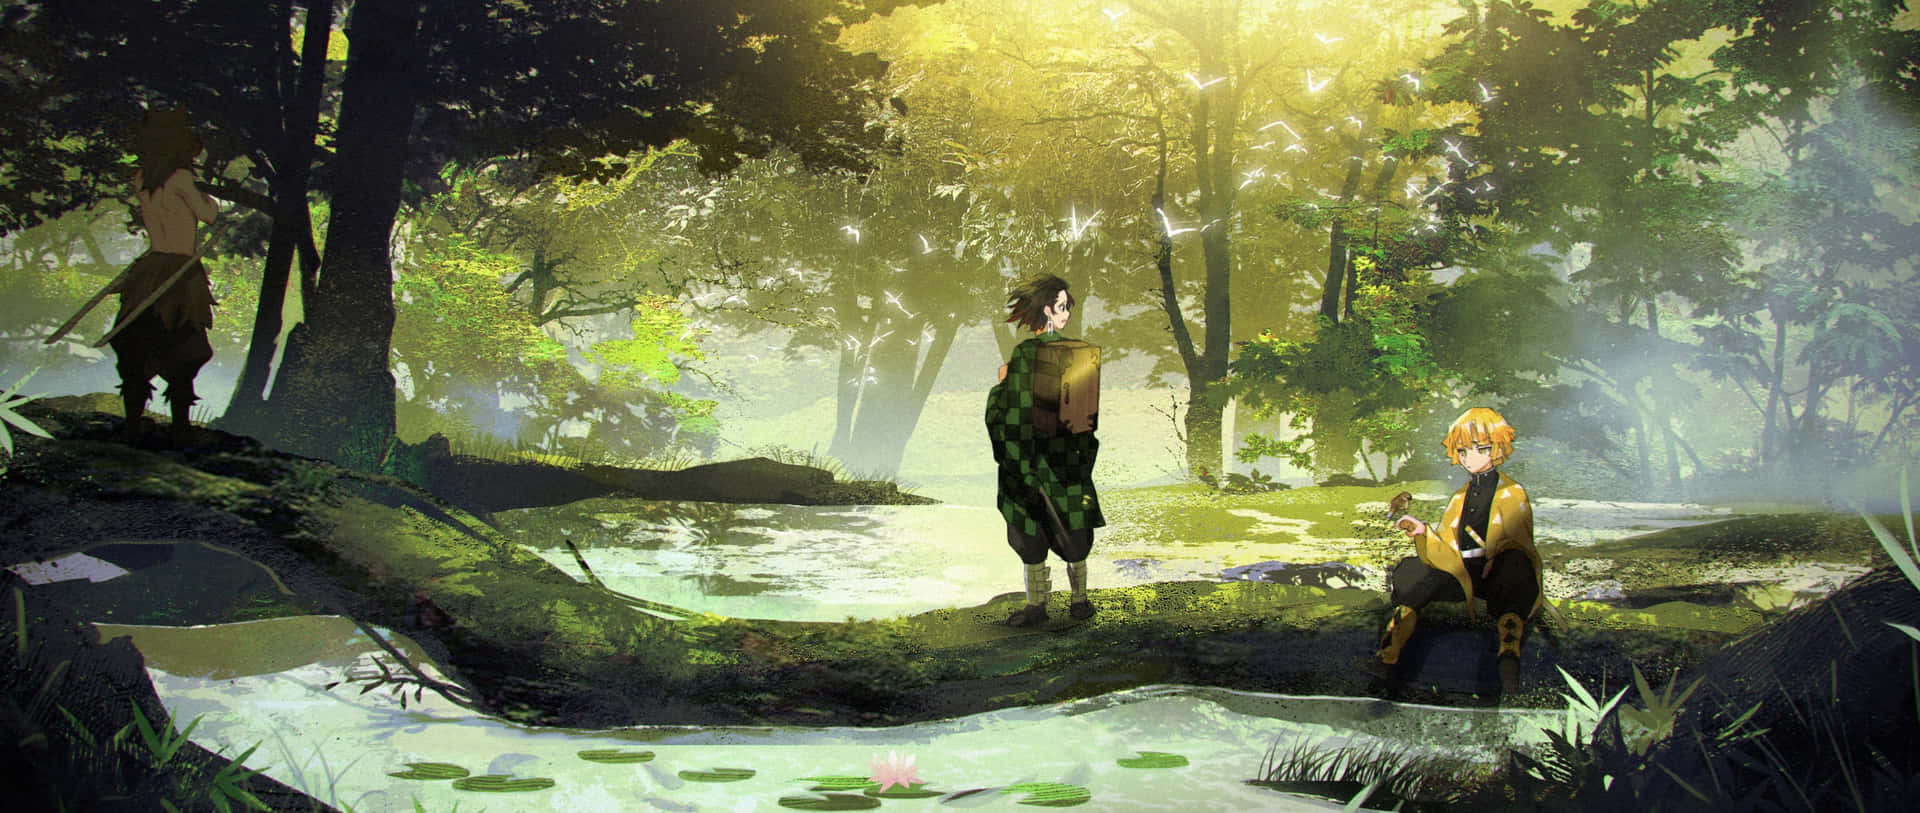 Demon Slayer Scenery Characters Forest River Wallpaper